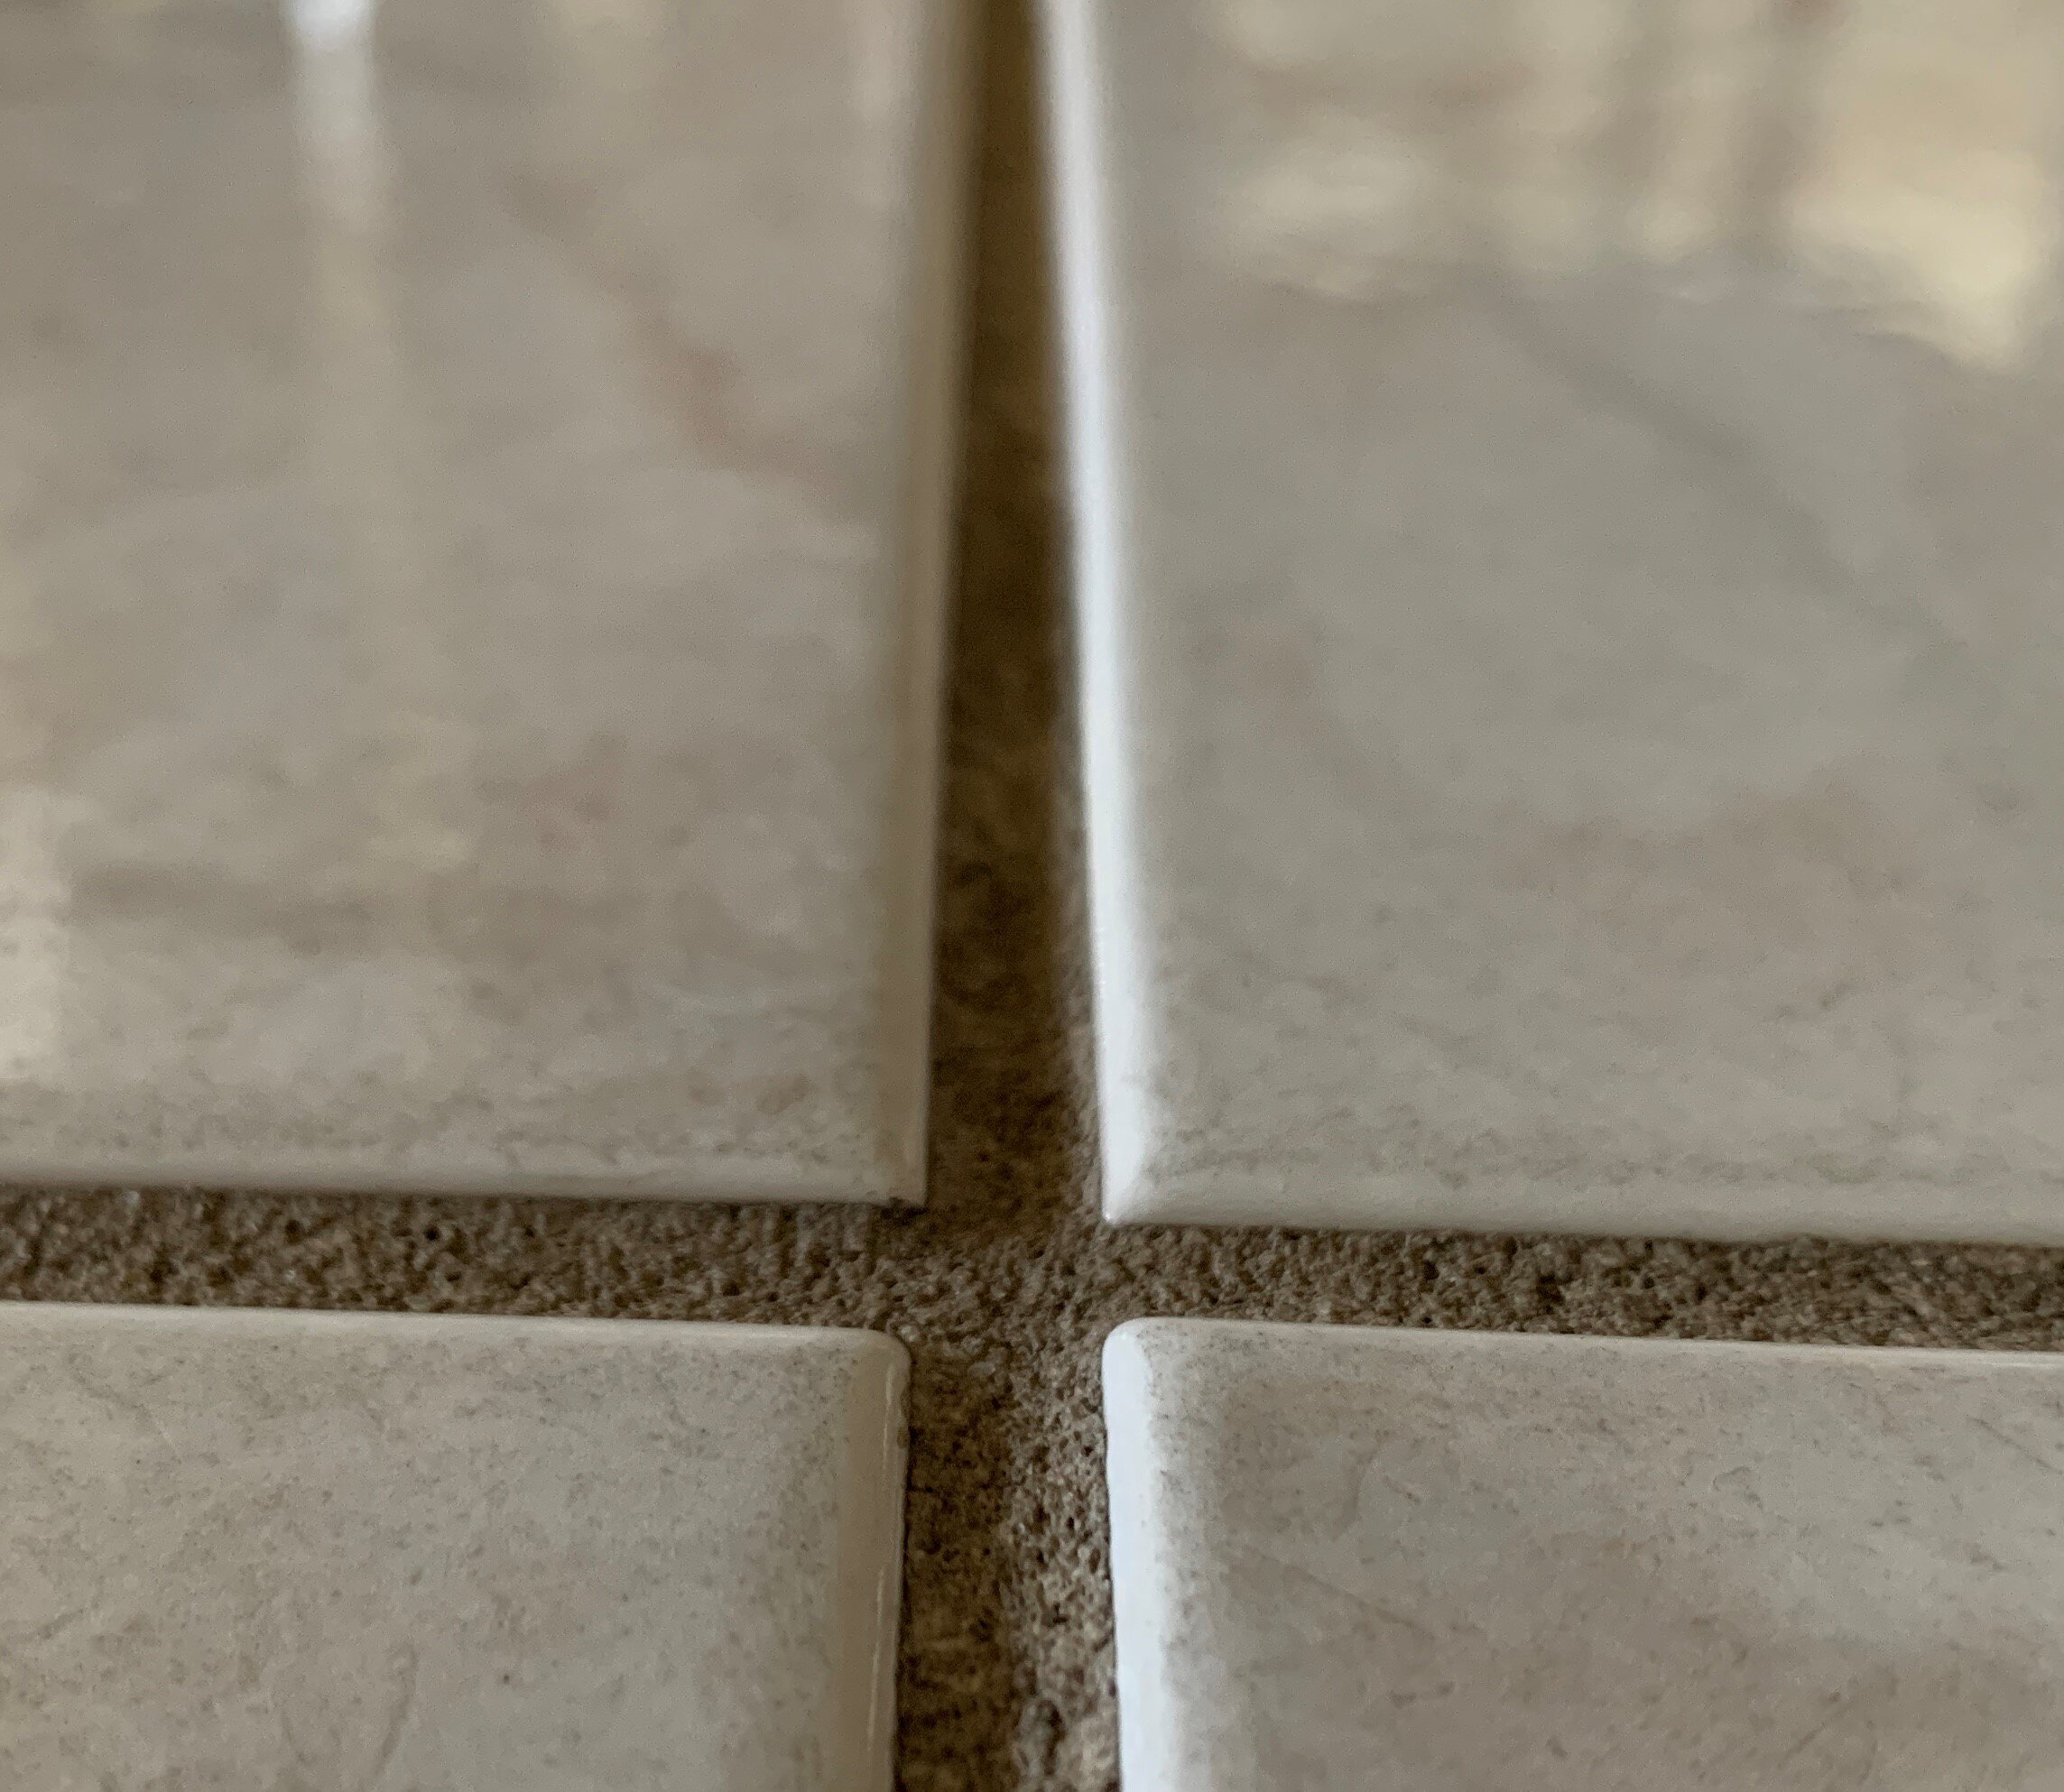 More grout lines do not add more slip resistance to a floor